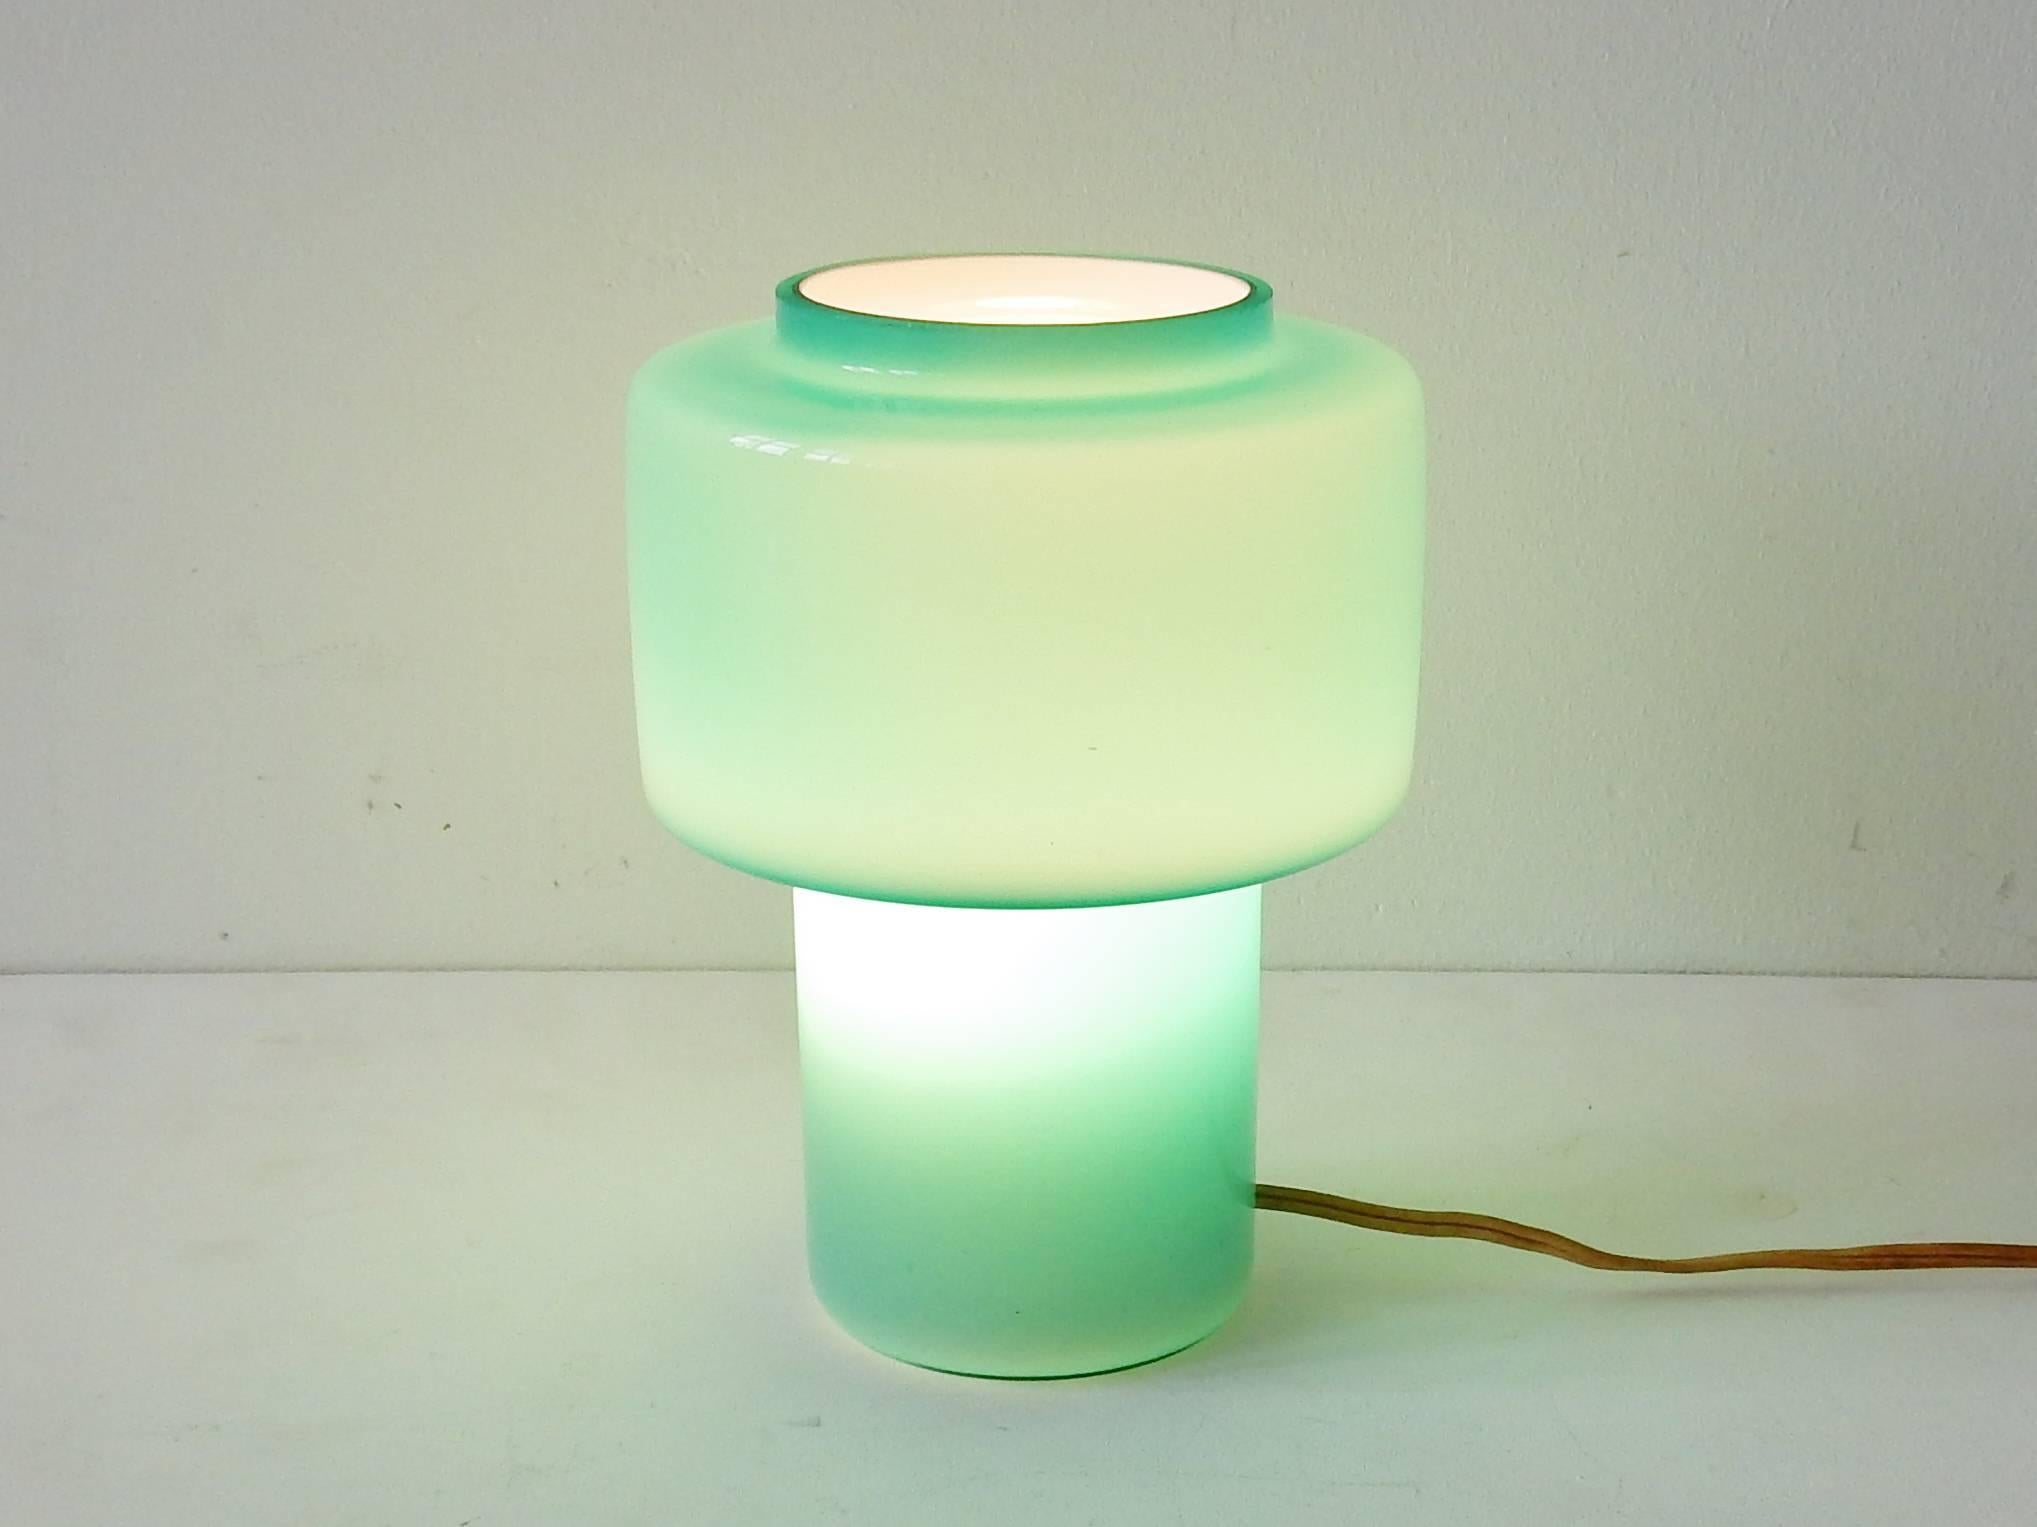 Very beautiful small glass table lamp in a good looking aquamarine or sea green color. This light is as beautiful on as when off. The inner white glass makes the soft color when lit. 
The condition of this light is very good with very little signs